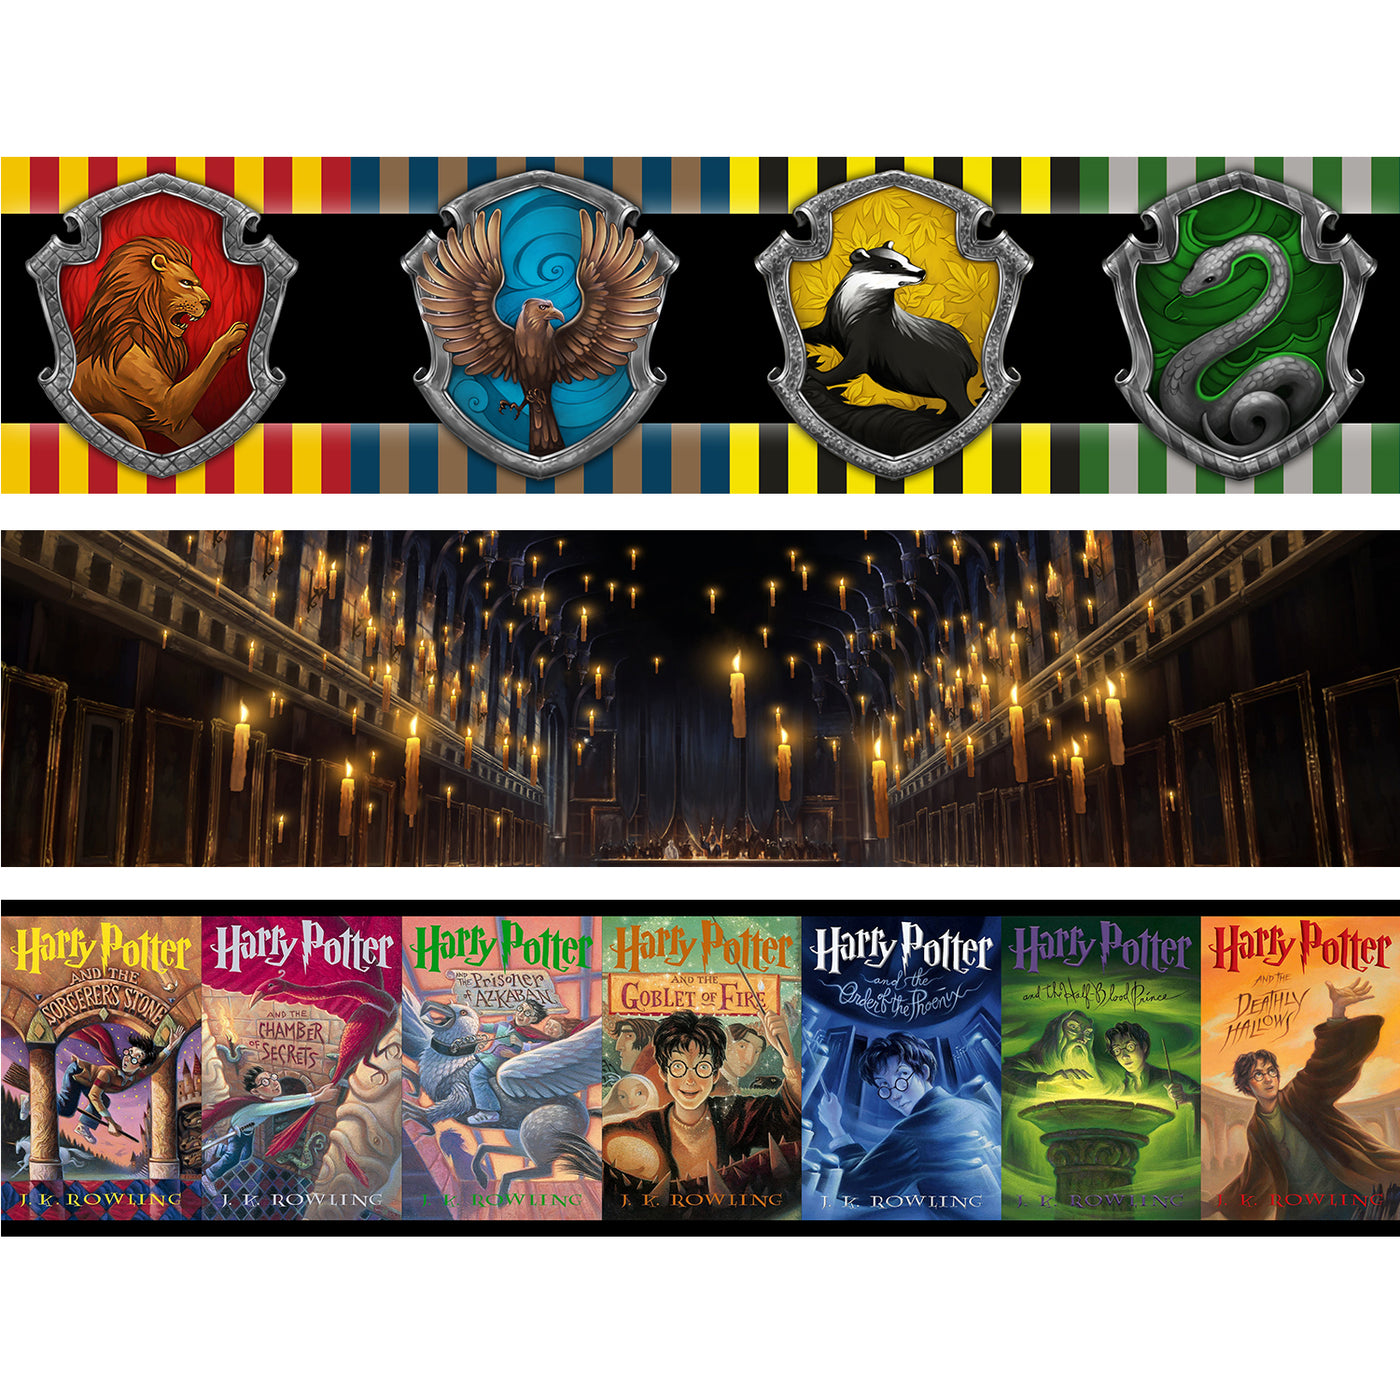 **BACK IN STOCK MAY 13TH** HARRY POTTER - Display Case for Funko Pops with 3 Backdrop Inserts, Corrugated Cardboard - Display Geek